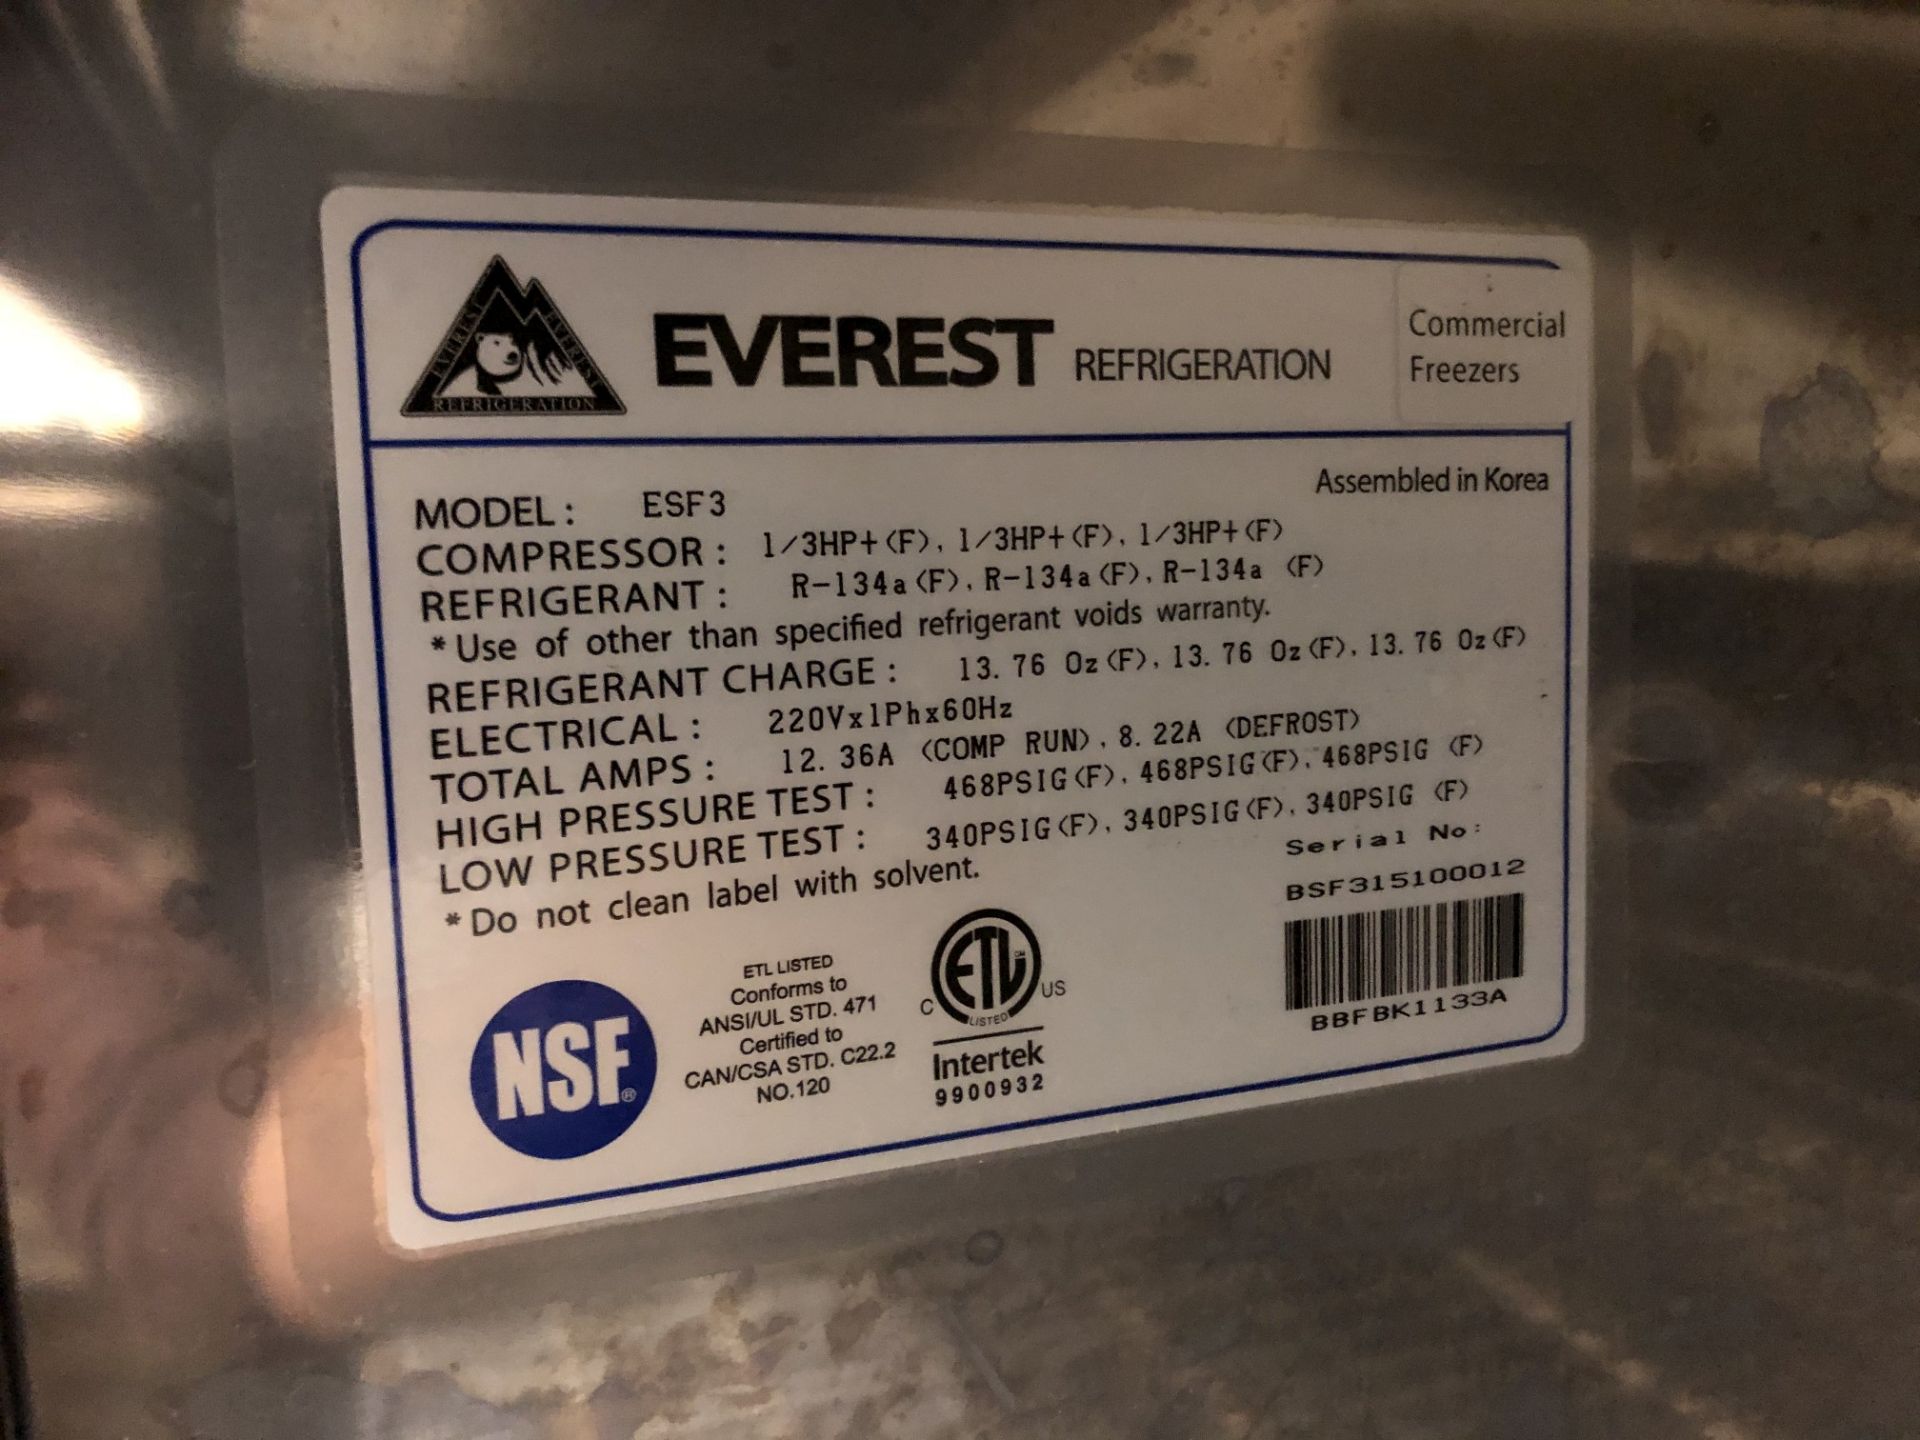 Everest Three Section Reach-In Freezer, Model ESF3 - Image 5 of 5